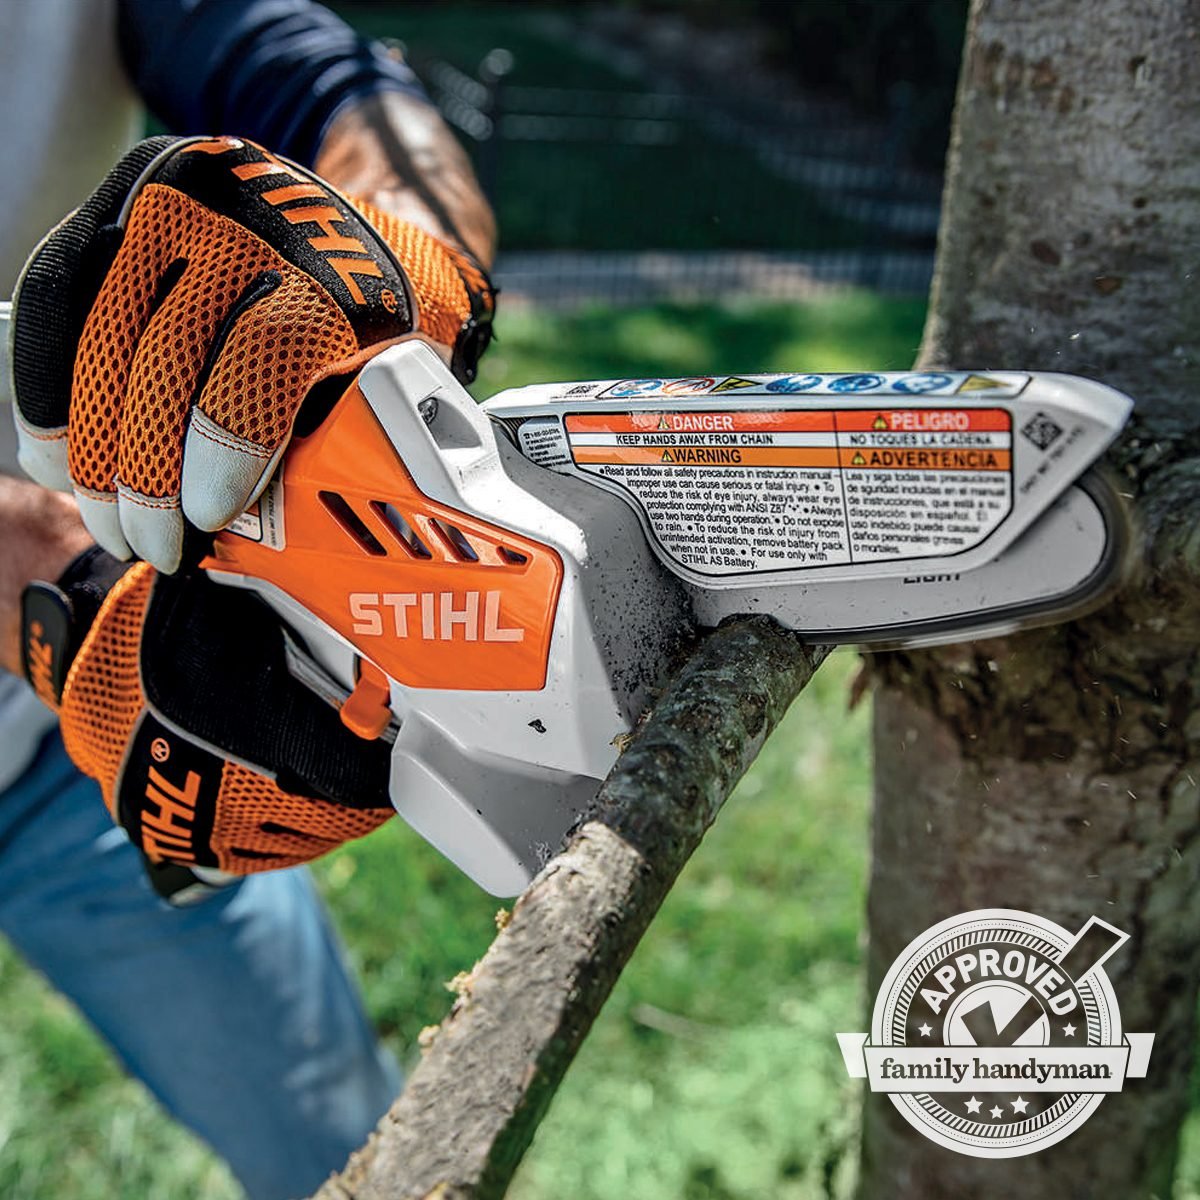 Stihl Cordless Pruning Saw Review: Should You Buy it?